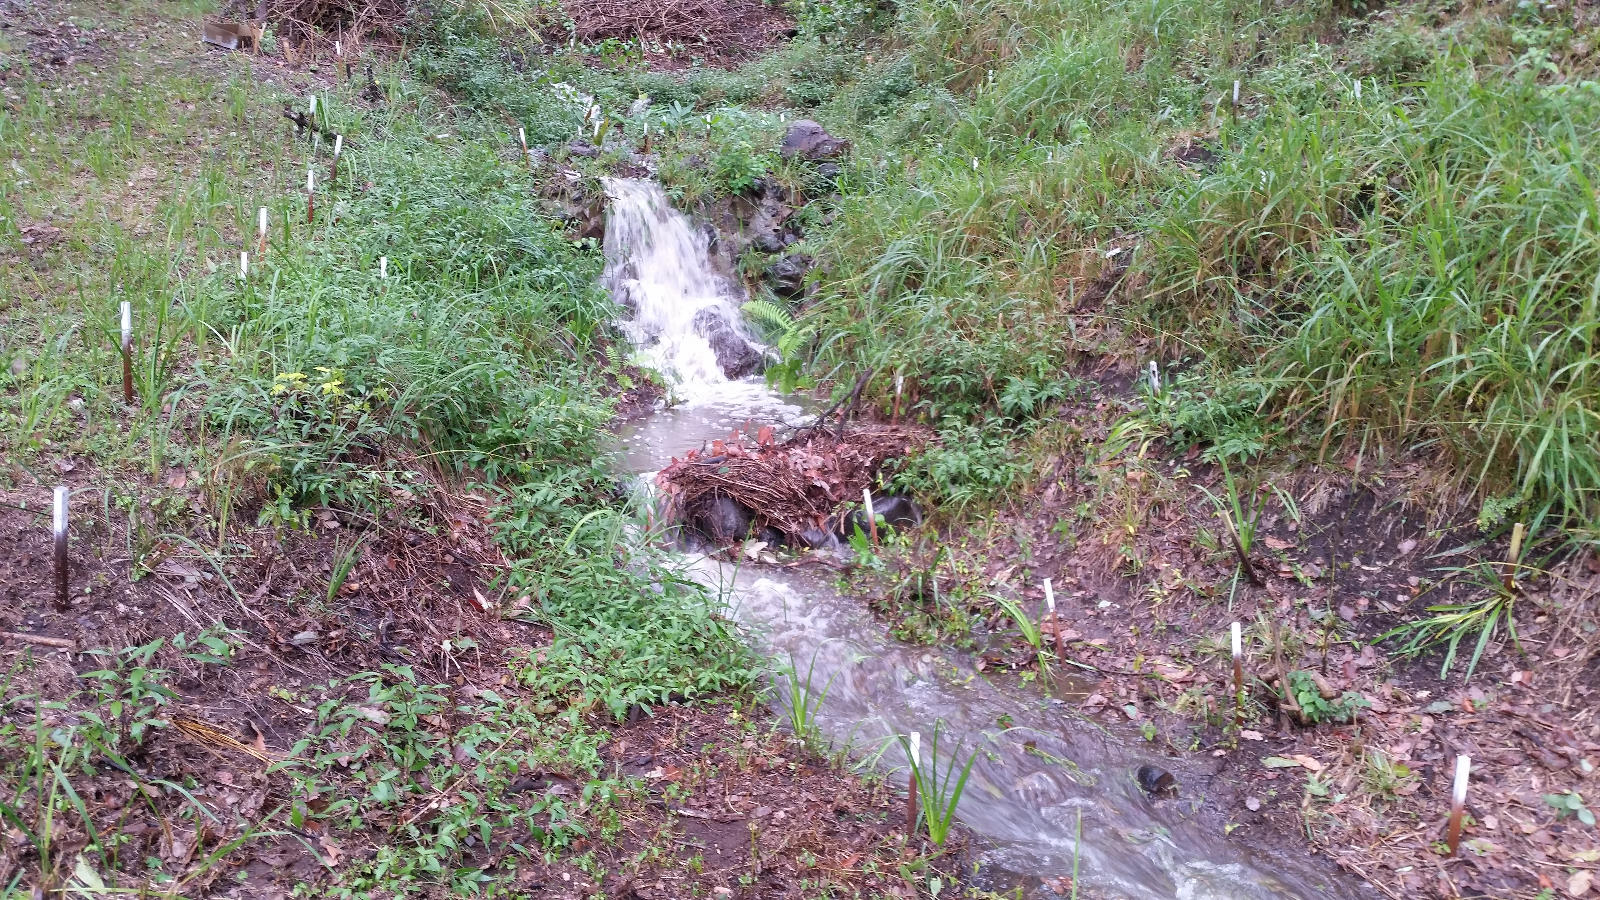 South Gully - Creek flowing